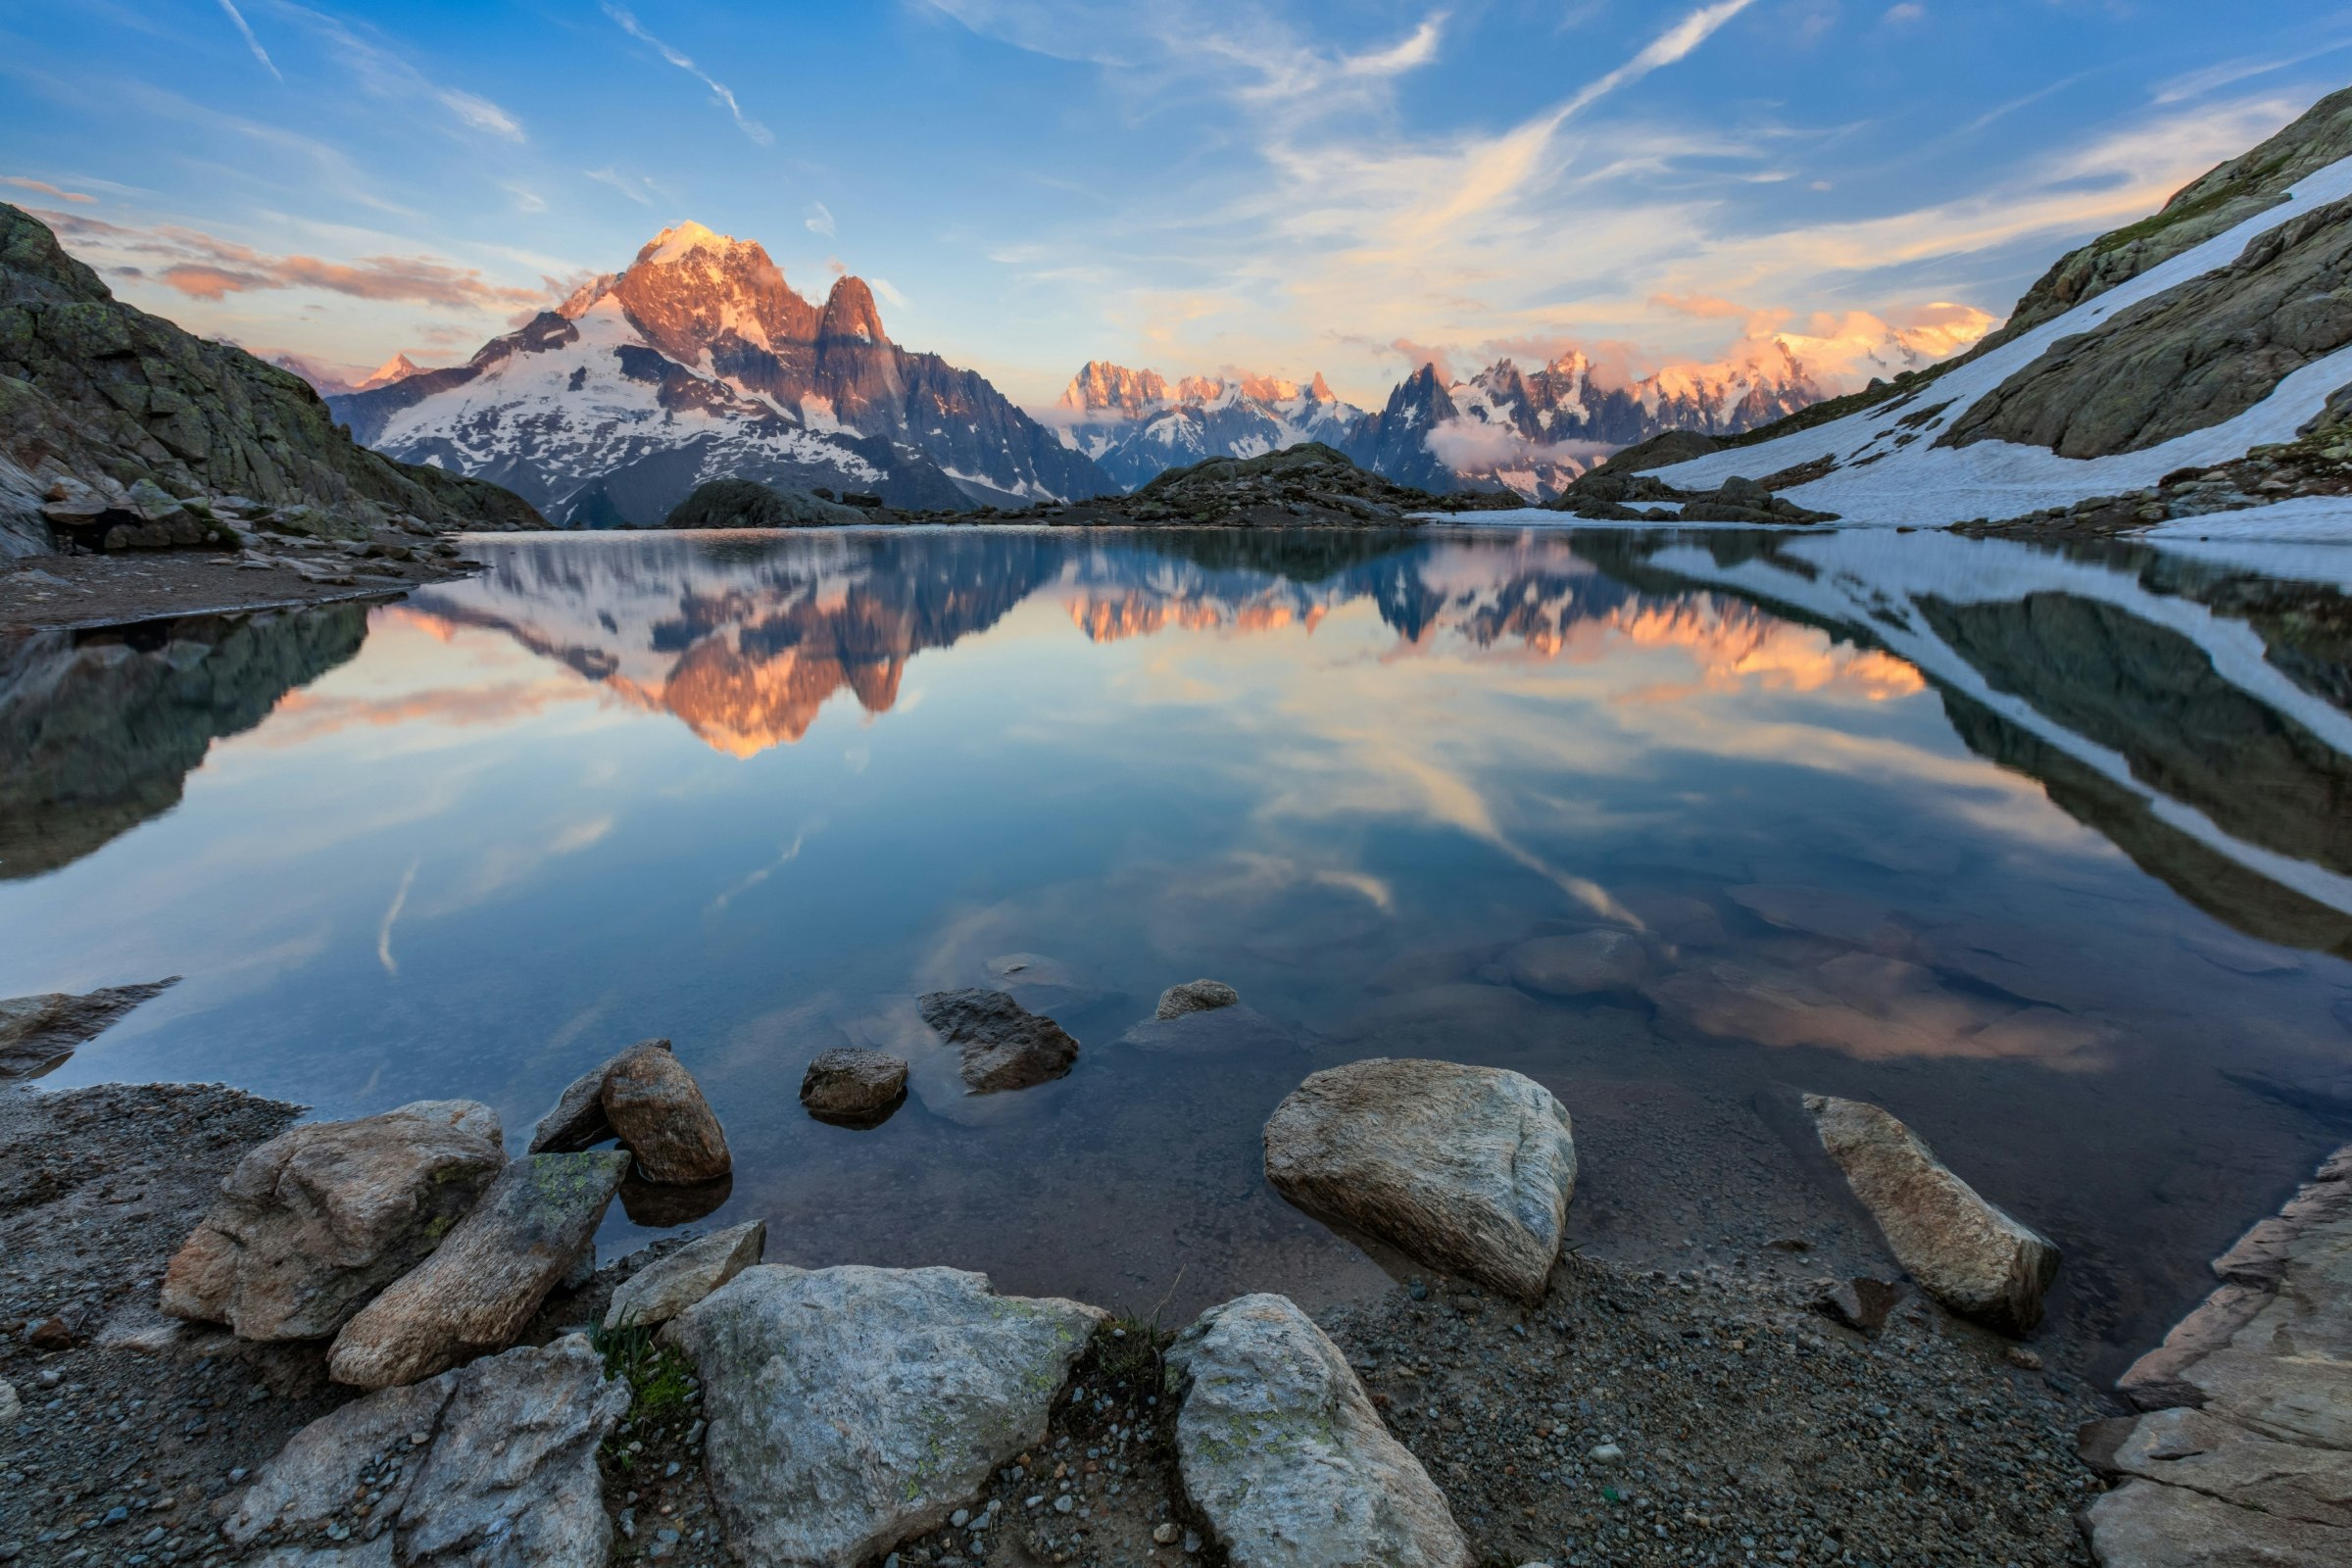 Mont Blanc Massif reflected in Lac Blanc, Graian Alps, France 